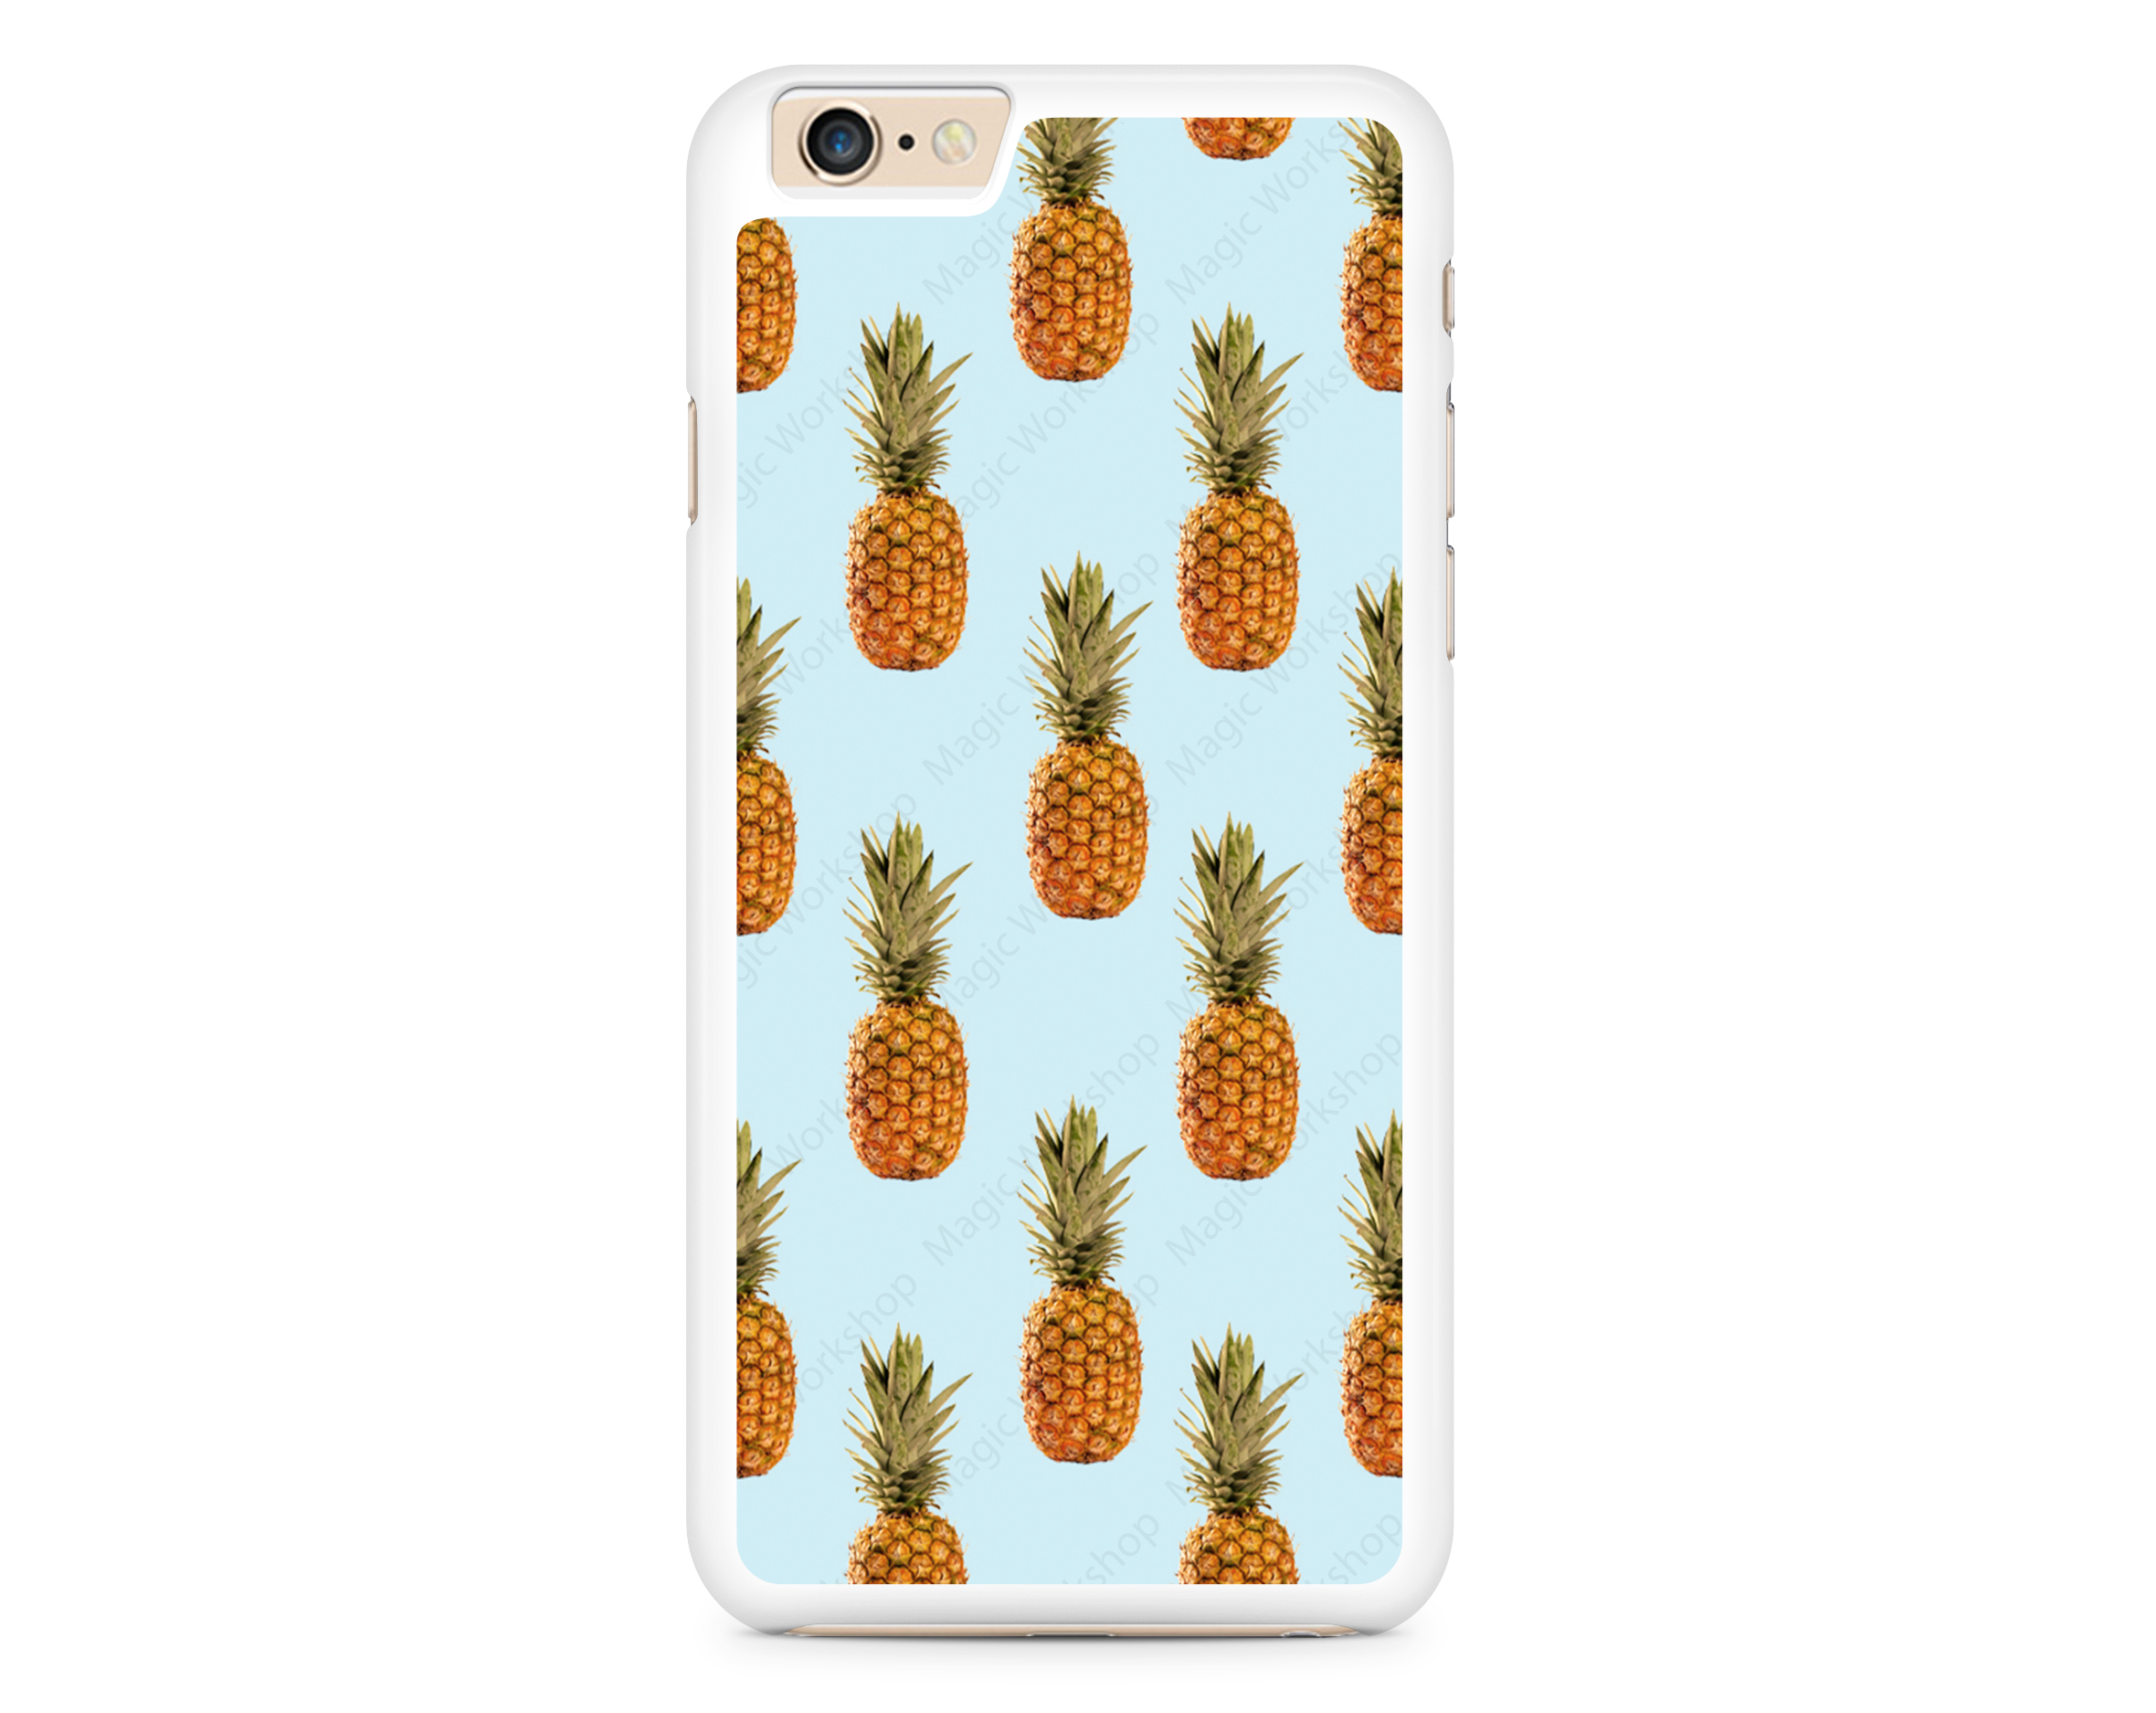 Pineapple, Vintage Style Case For IPhone 4 4s 5 5s 5c 6 6 Plus 6s 6s ...